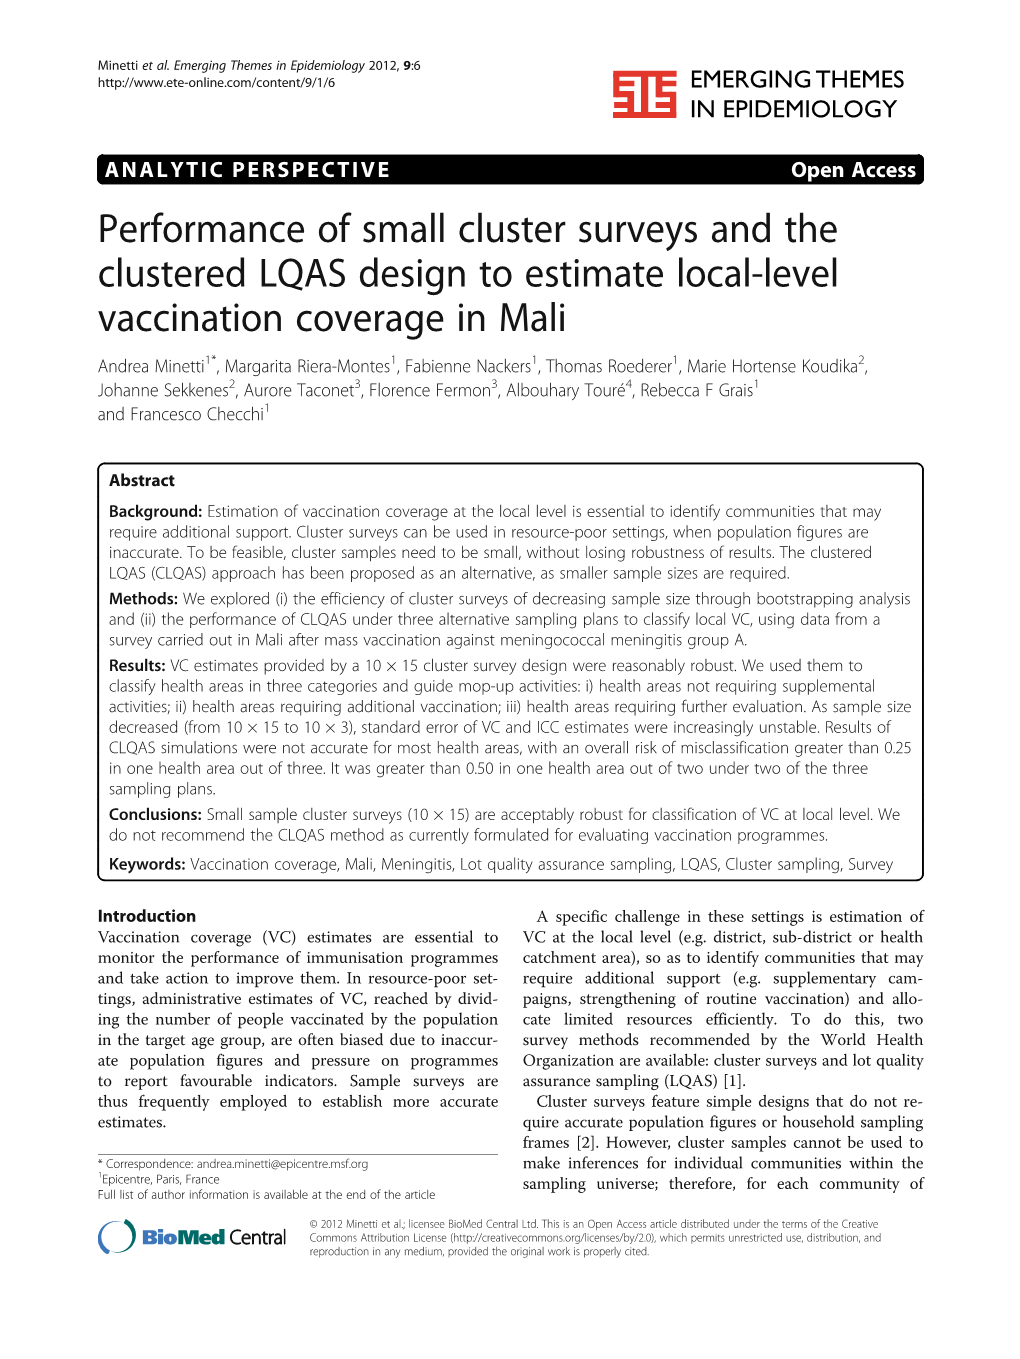 Performance of Small Cluster Surveys and the Clustered LQAS Design To